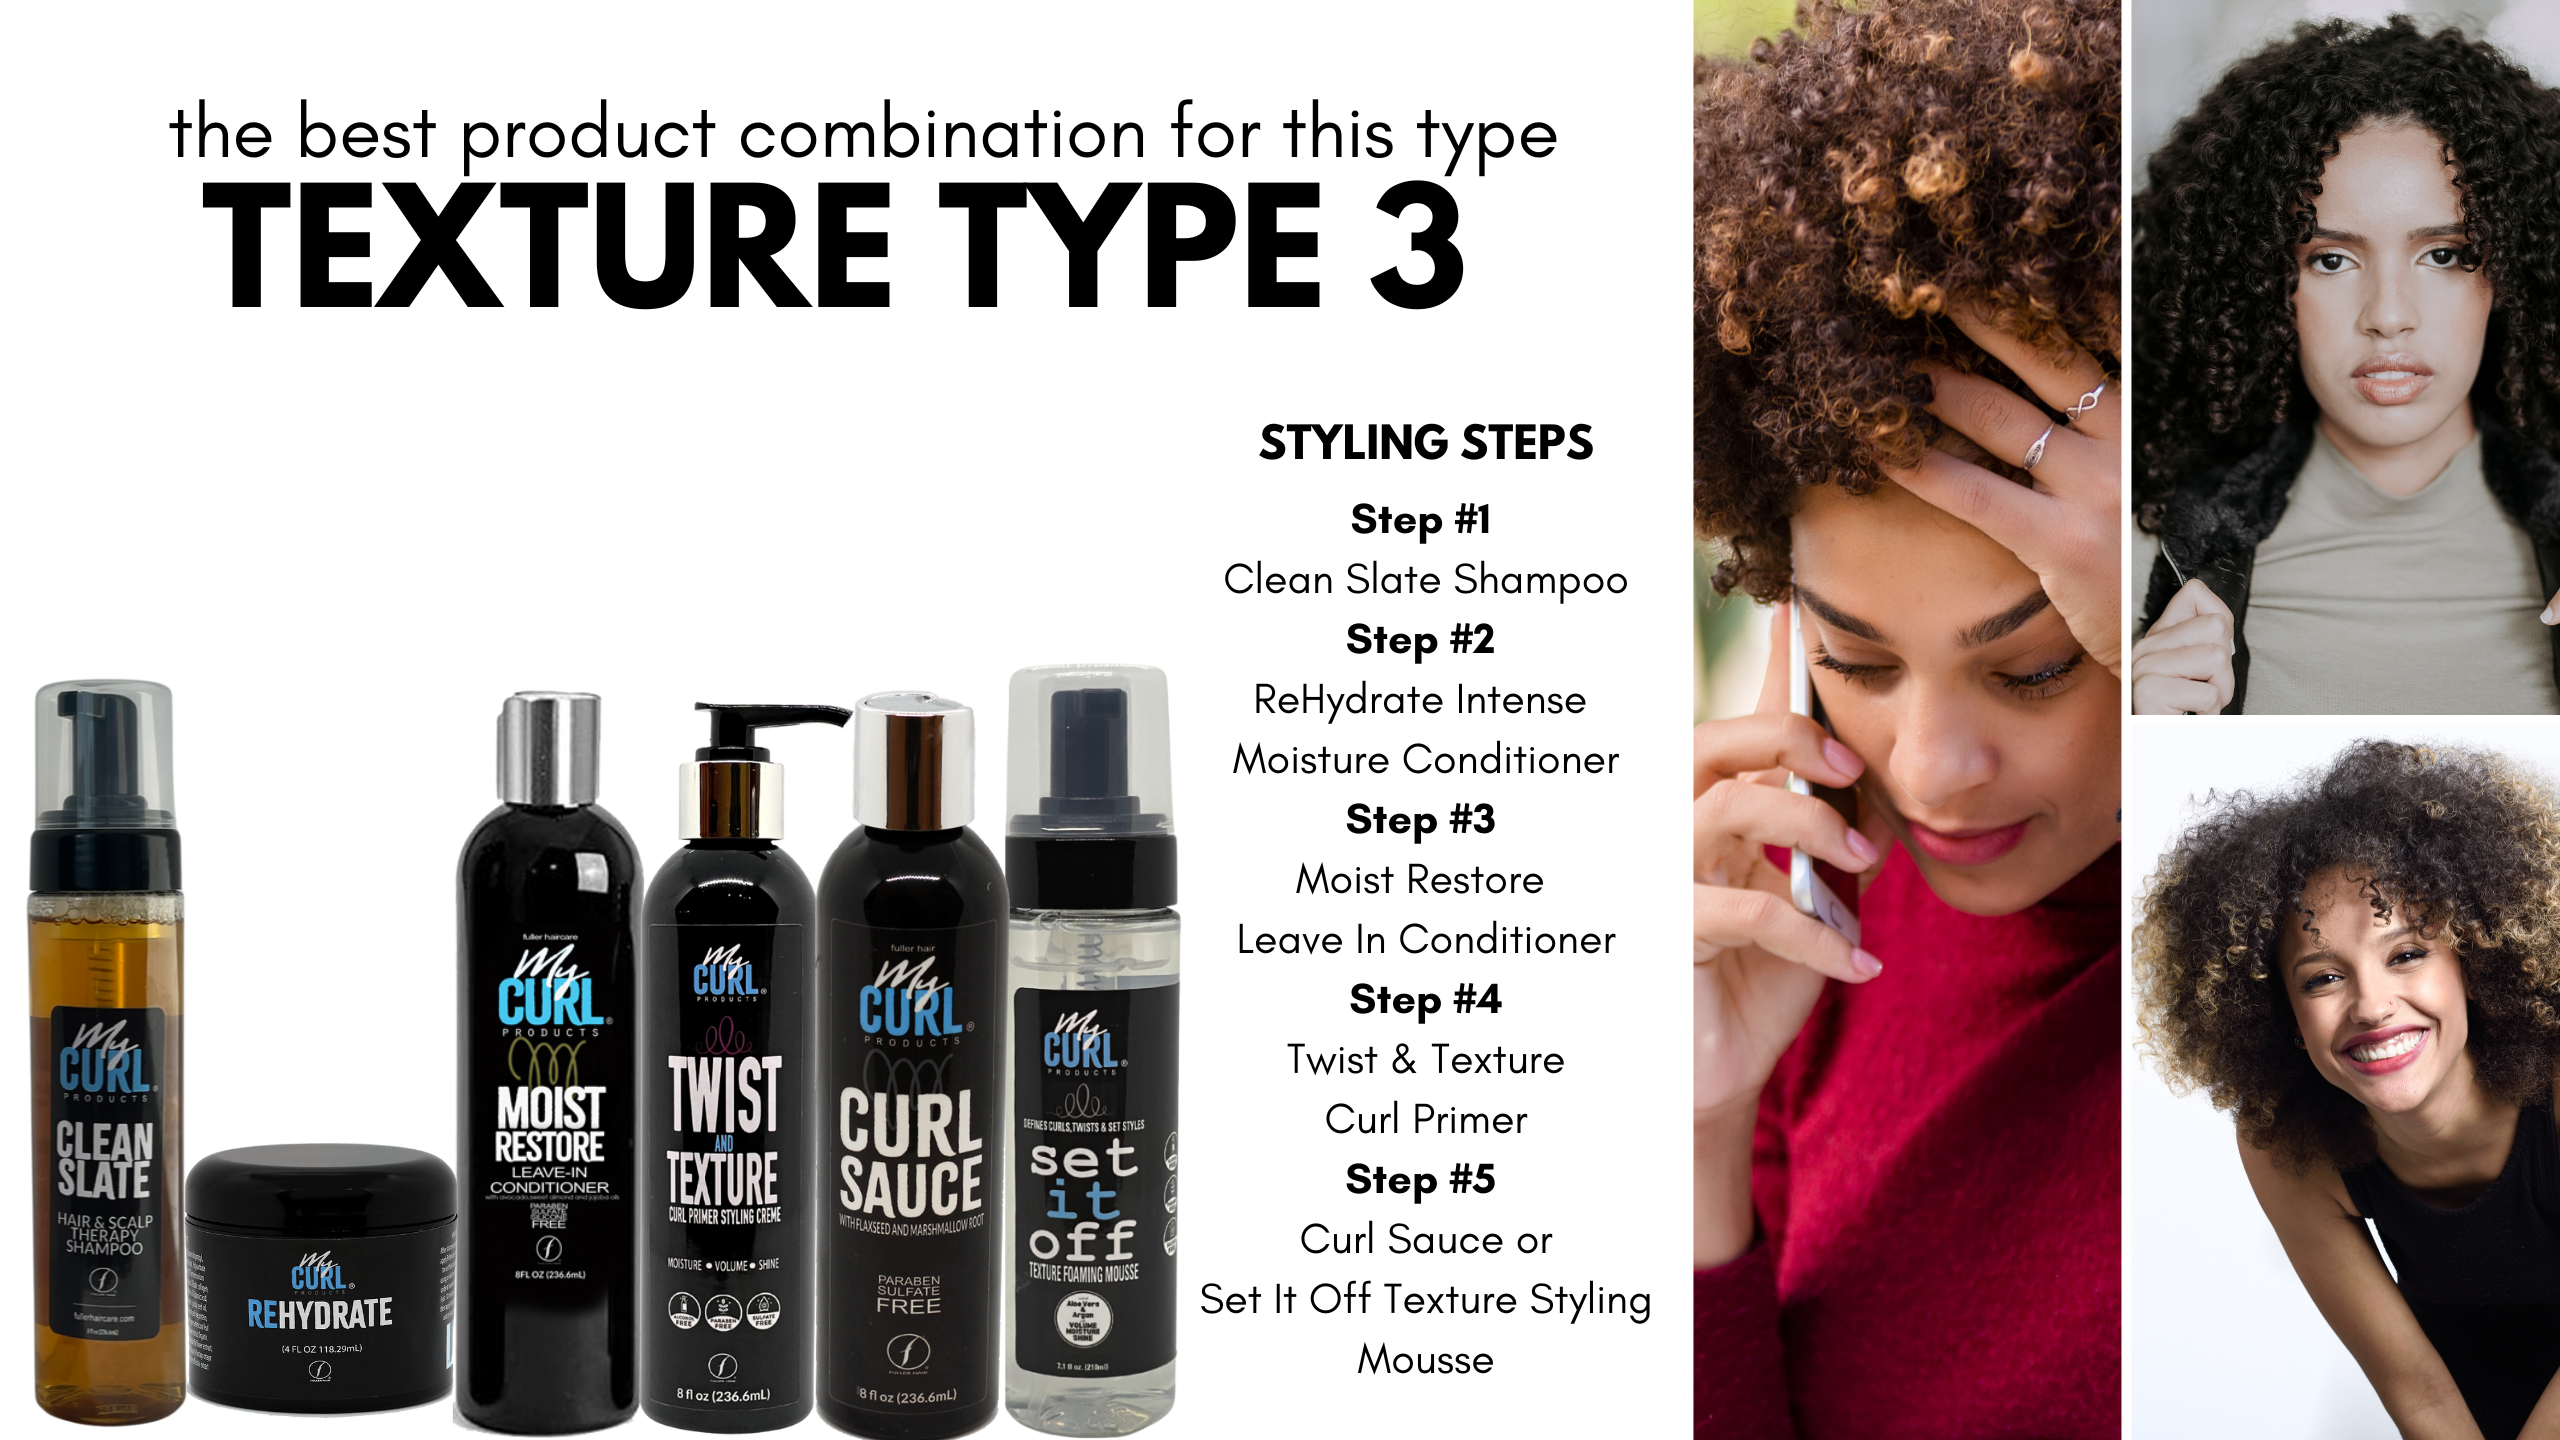 CLEAN SLATE HAIR & SCALP THERAPY SHAMPOO – My Curl Products